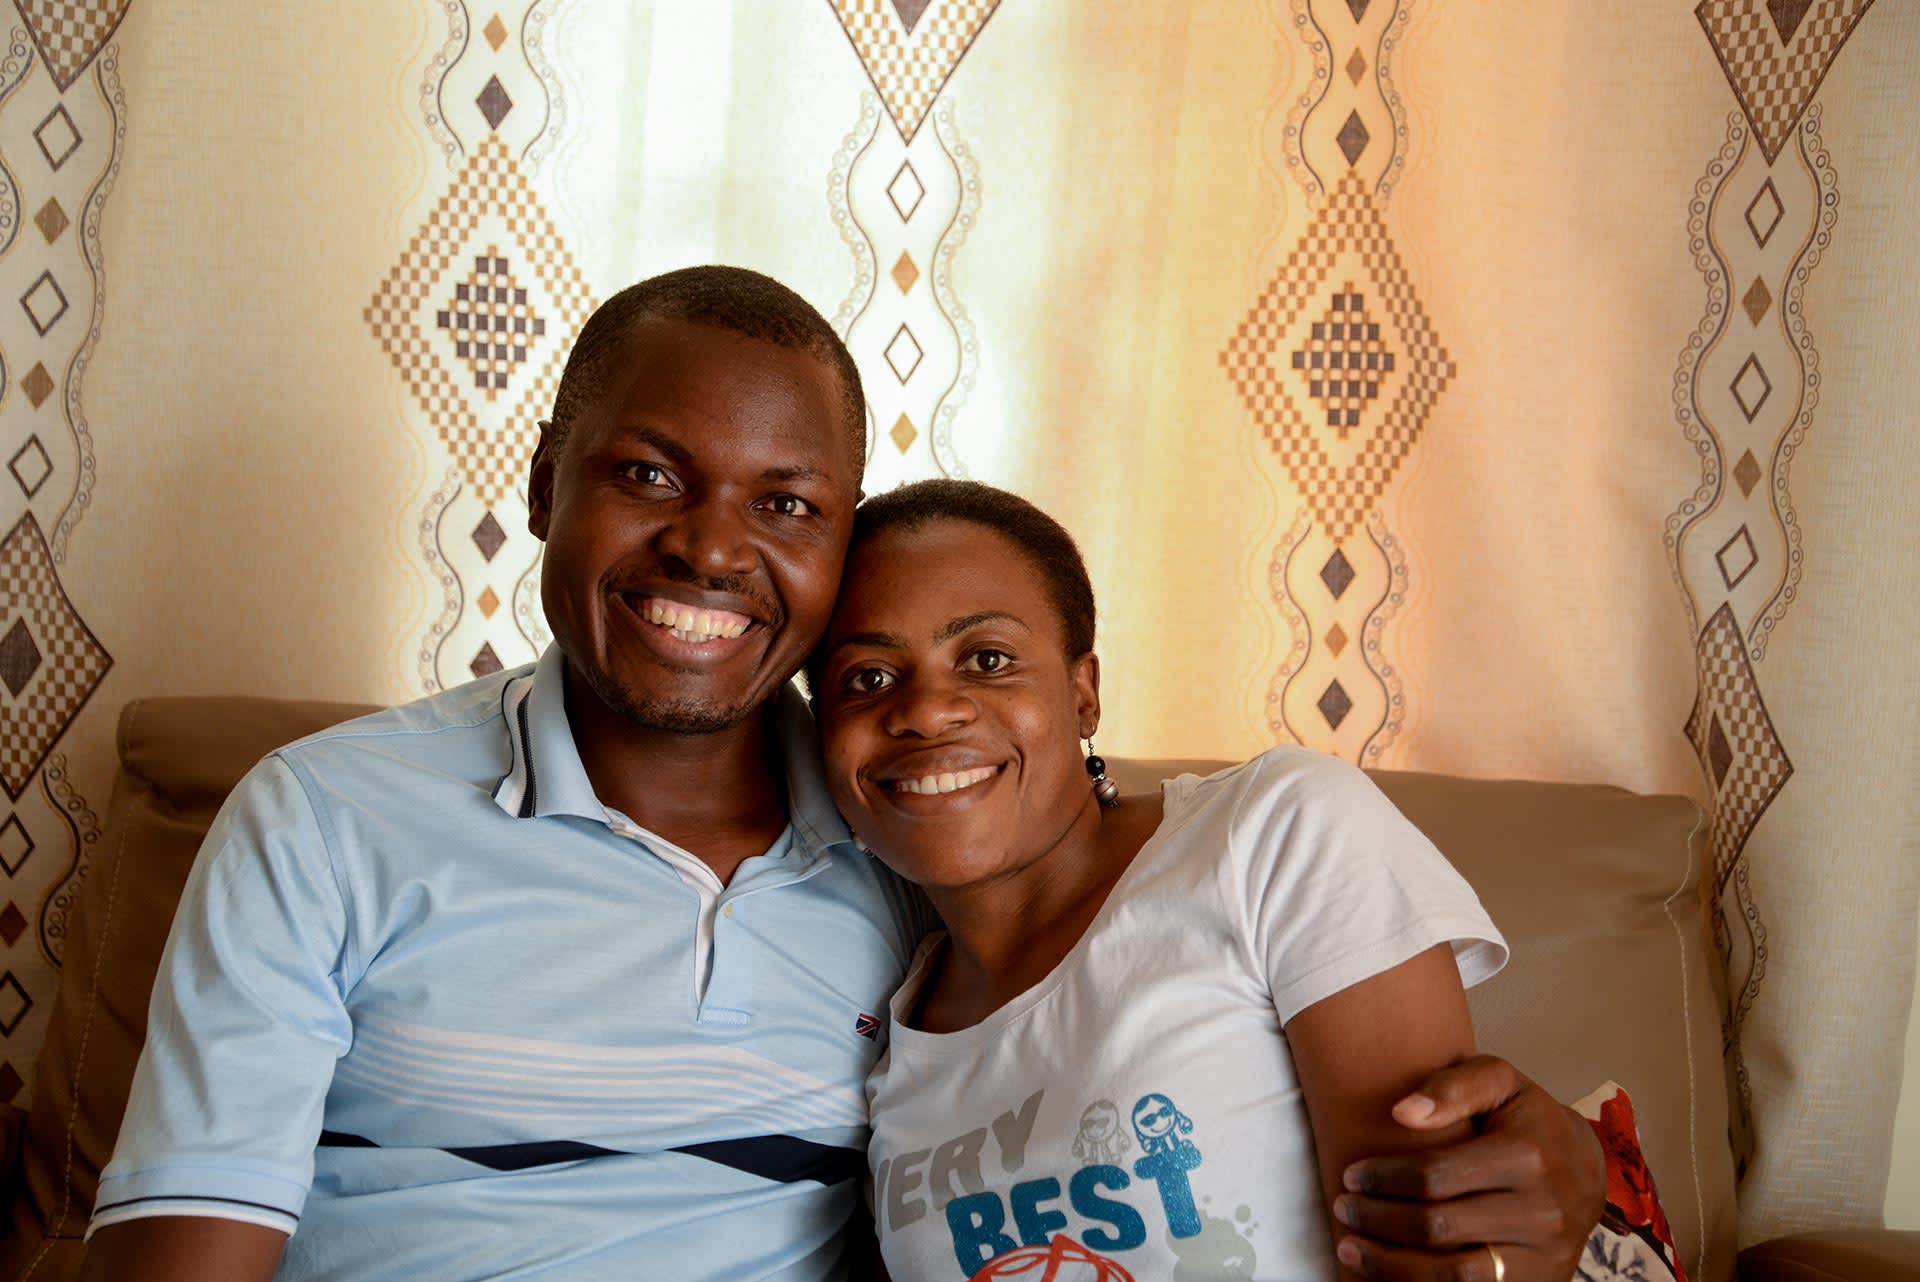 A Ugandan man and woman sit together on a couch and smile.